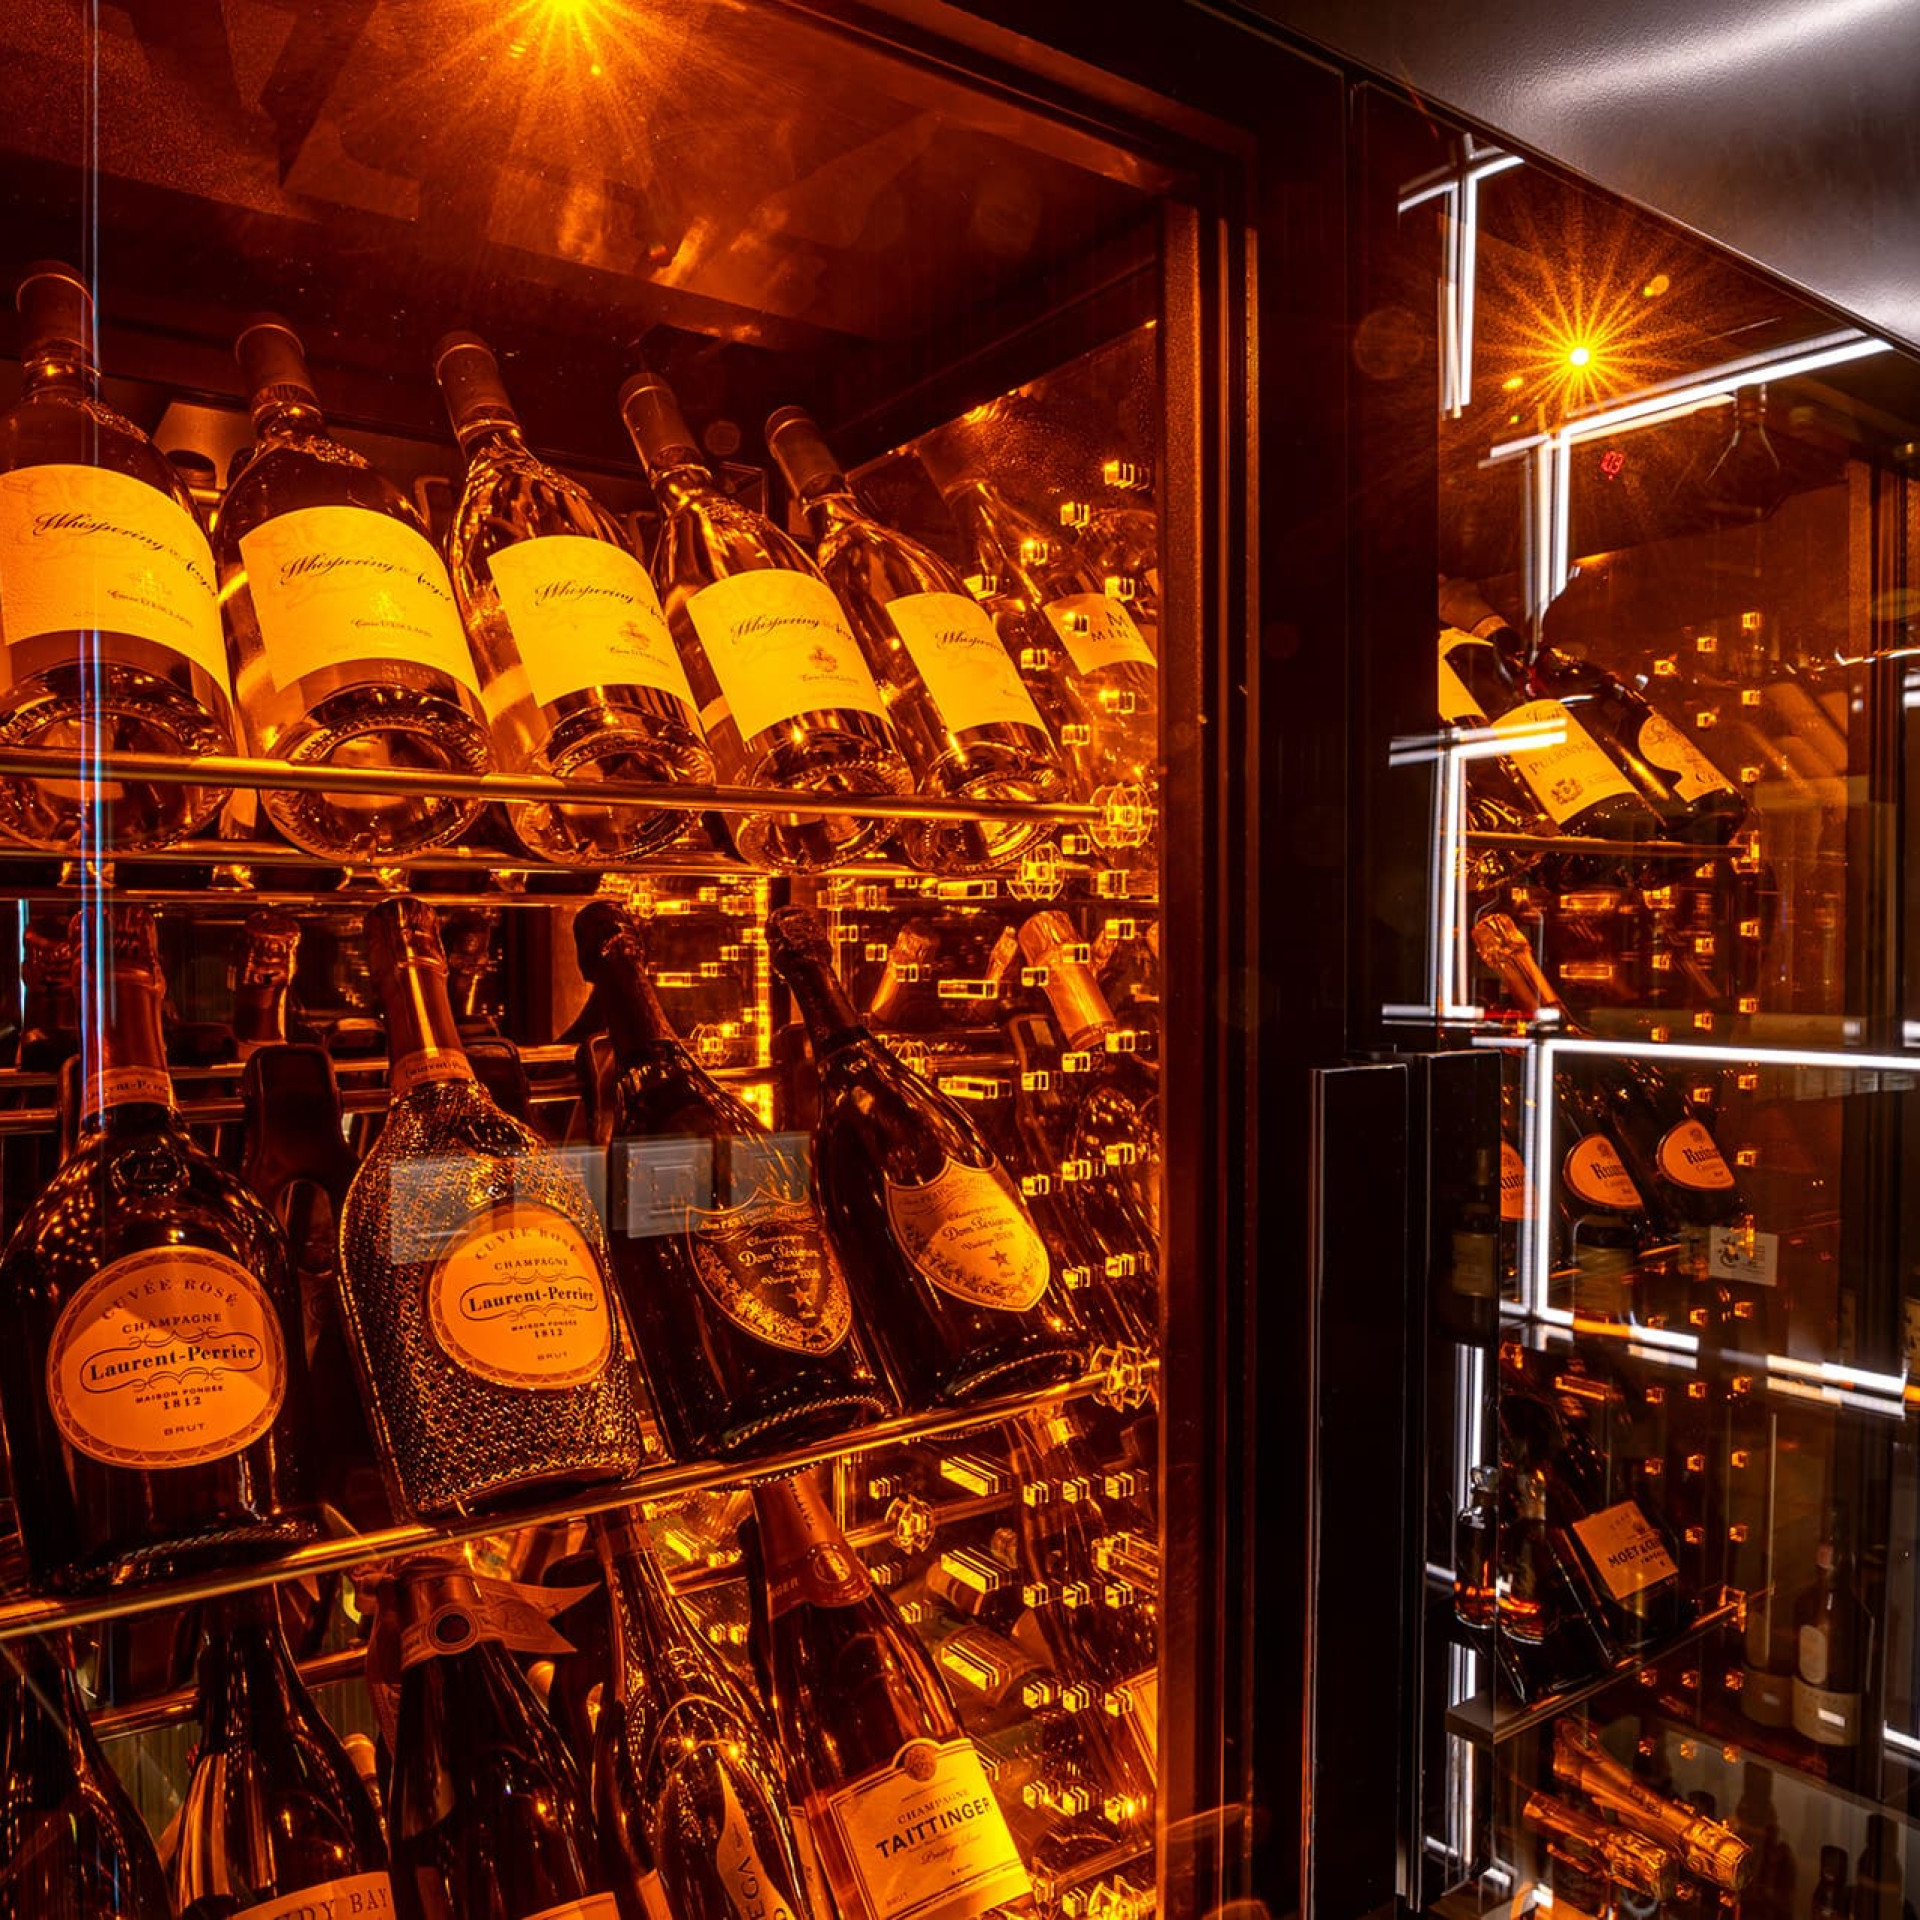 Double glass door wine display case with integrated lighting and play of lights on the mirrors and materials; attract attention and increase your wine turnover with great promotion of your wine list.